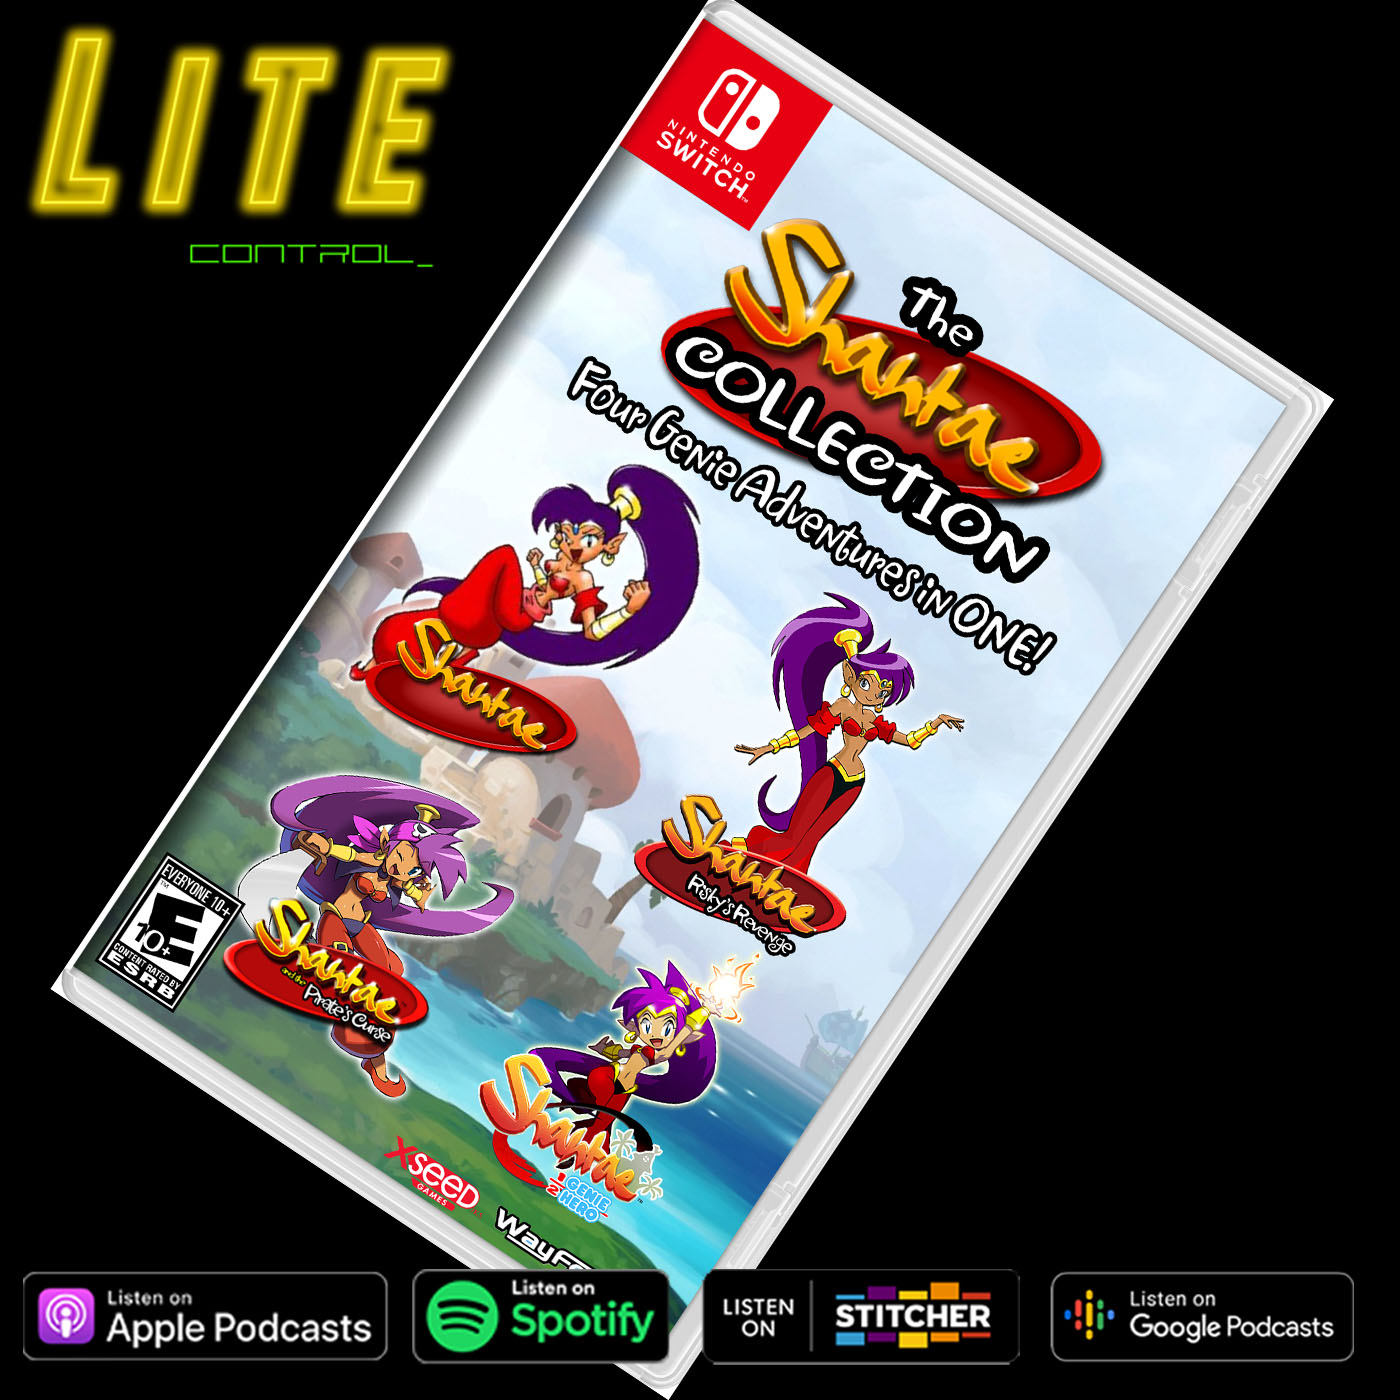 Lite Control 18.92 - Shantae Series Is Now Available On The Nintendo Switch